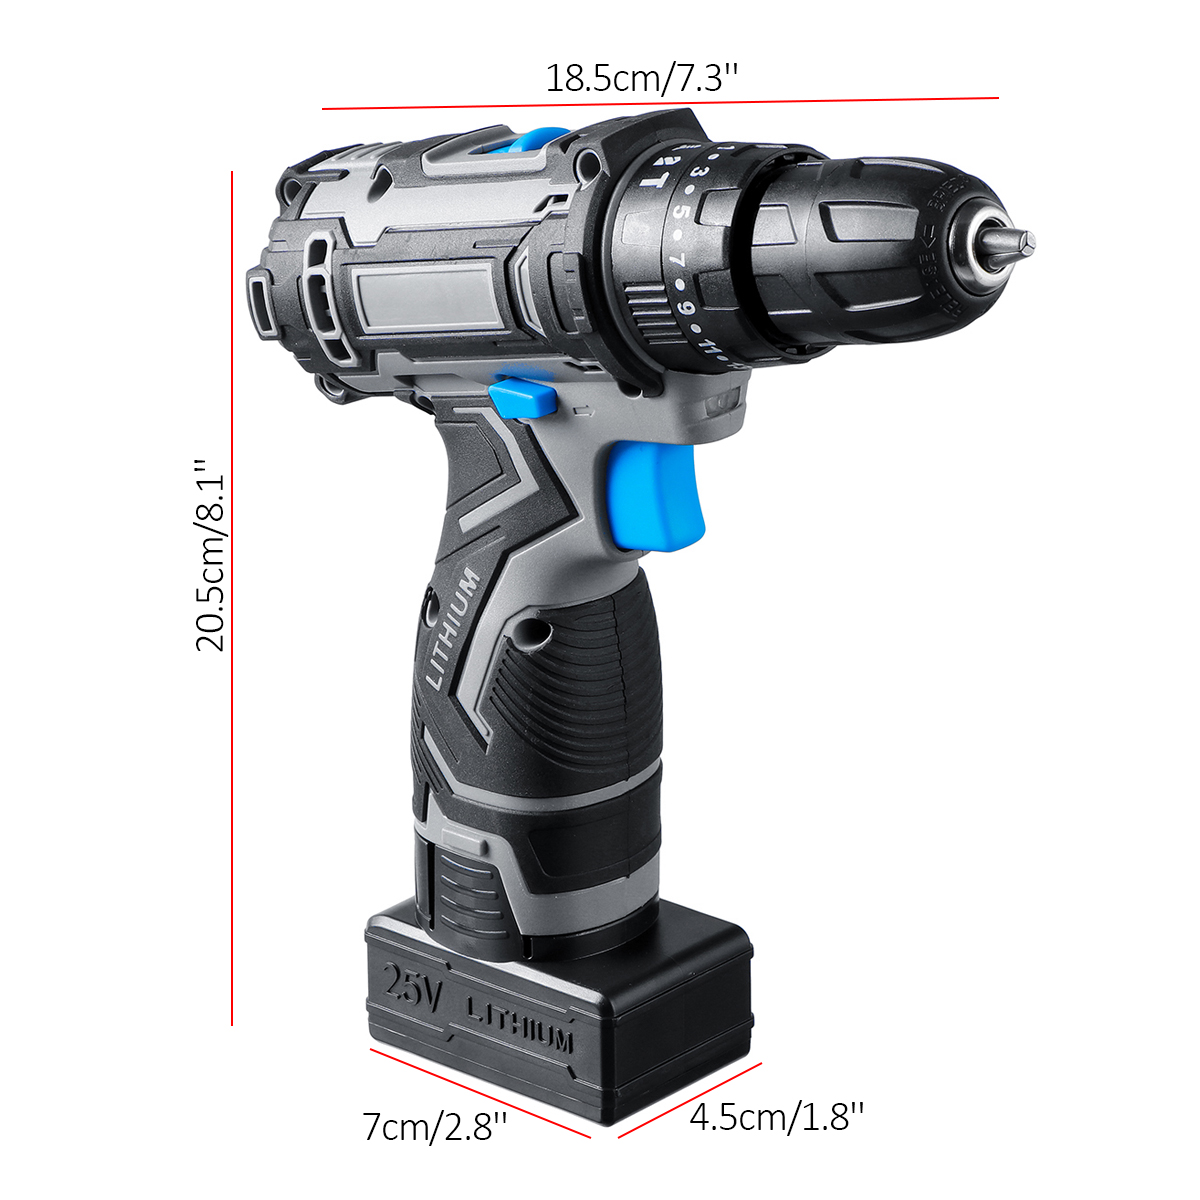 25V-Cordless-Drill-Screwdriver-Mini-Wireless-Power-Driver-With-2-Lithium-Ion-Battery-1794657-13